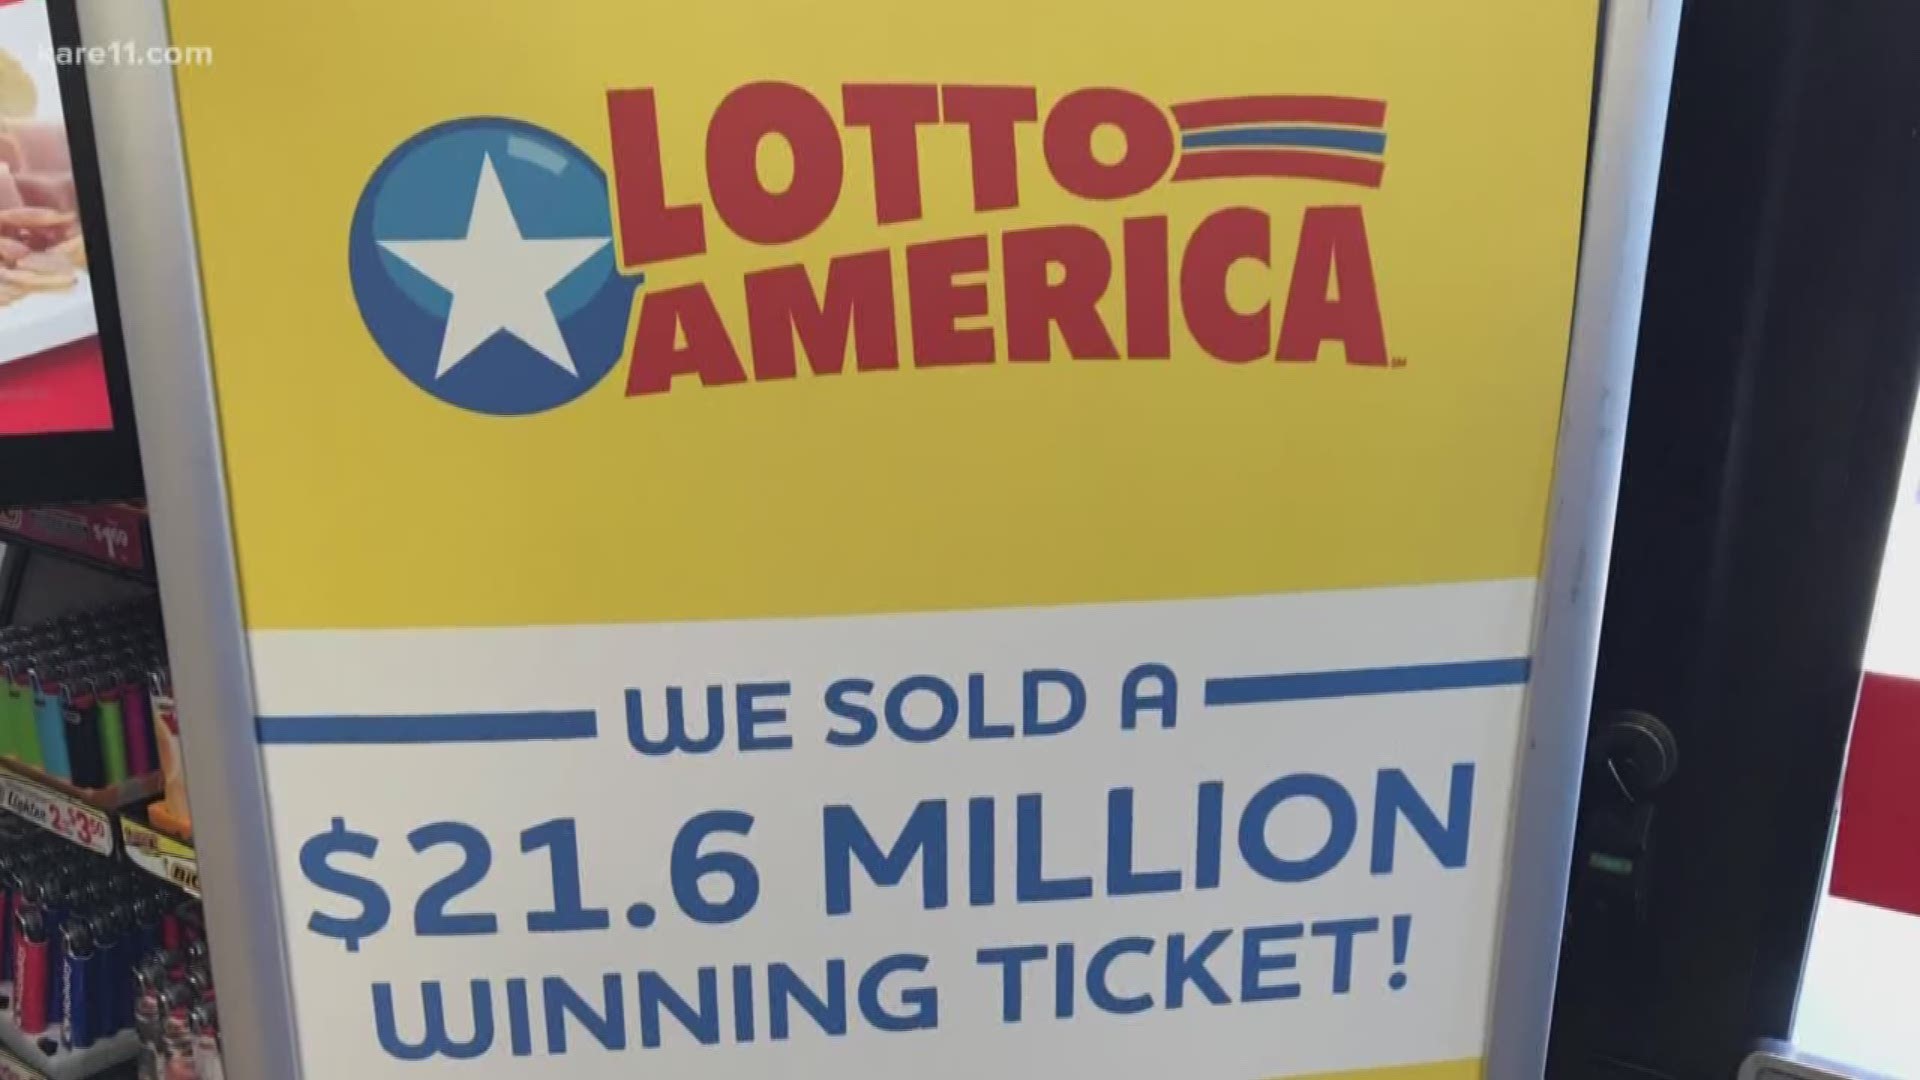 Lottery officials are waiting to meet Minnesota's newest millionaire after a winning Lotto America ticket worth $21.6 million was sold at a convenience store in Ramsey.